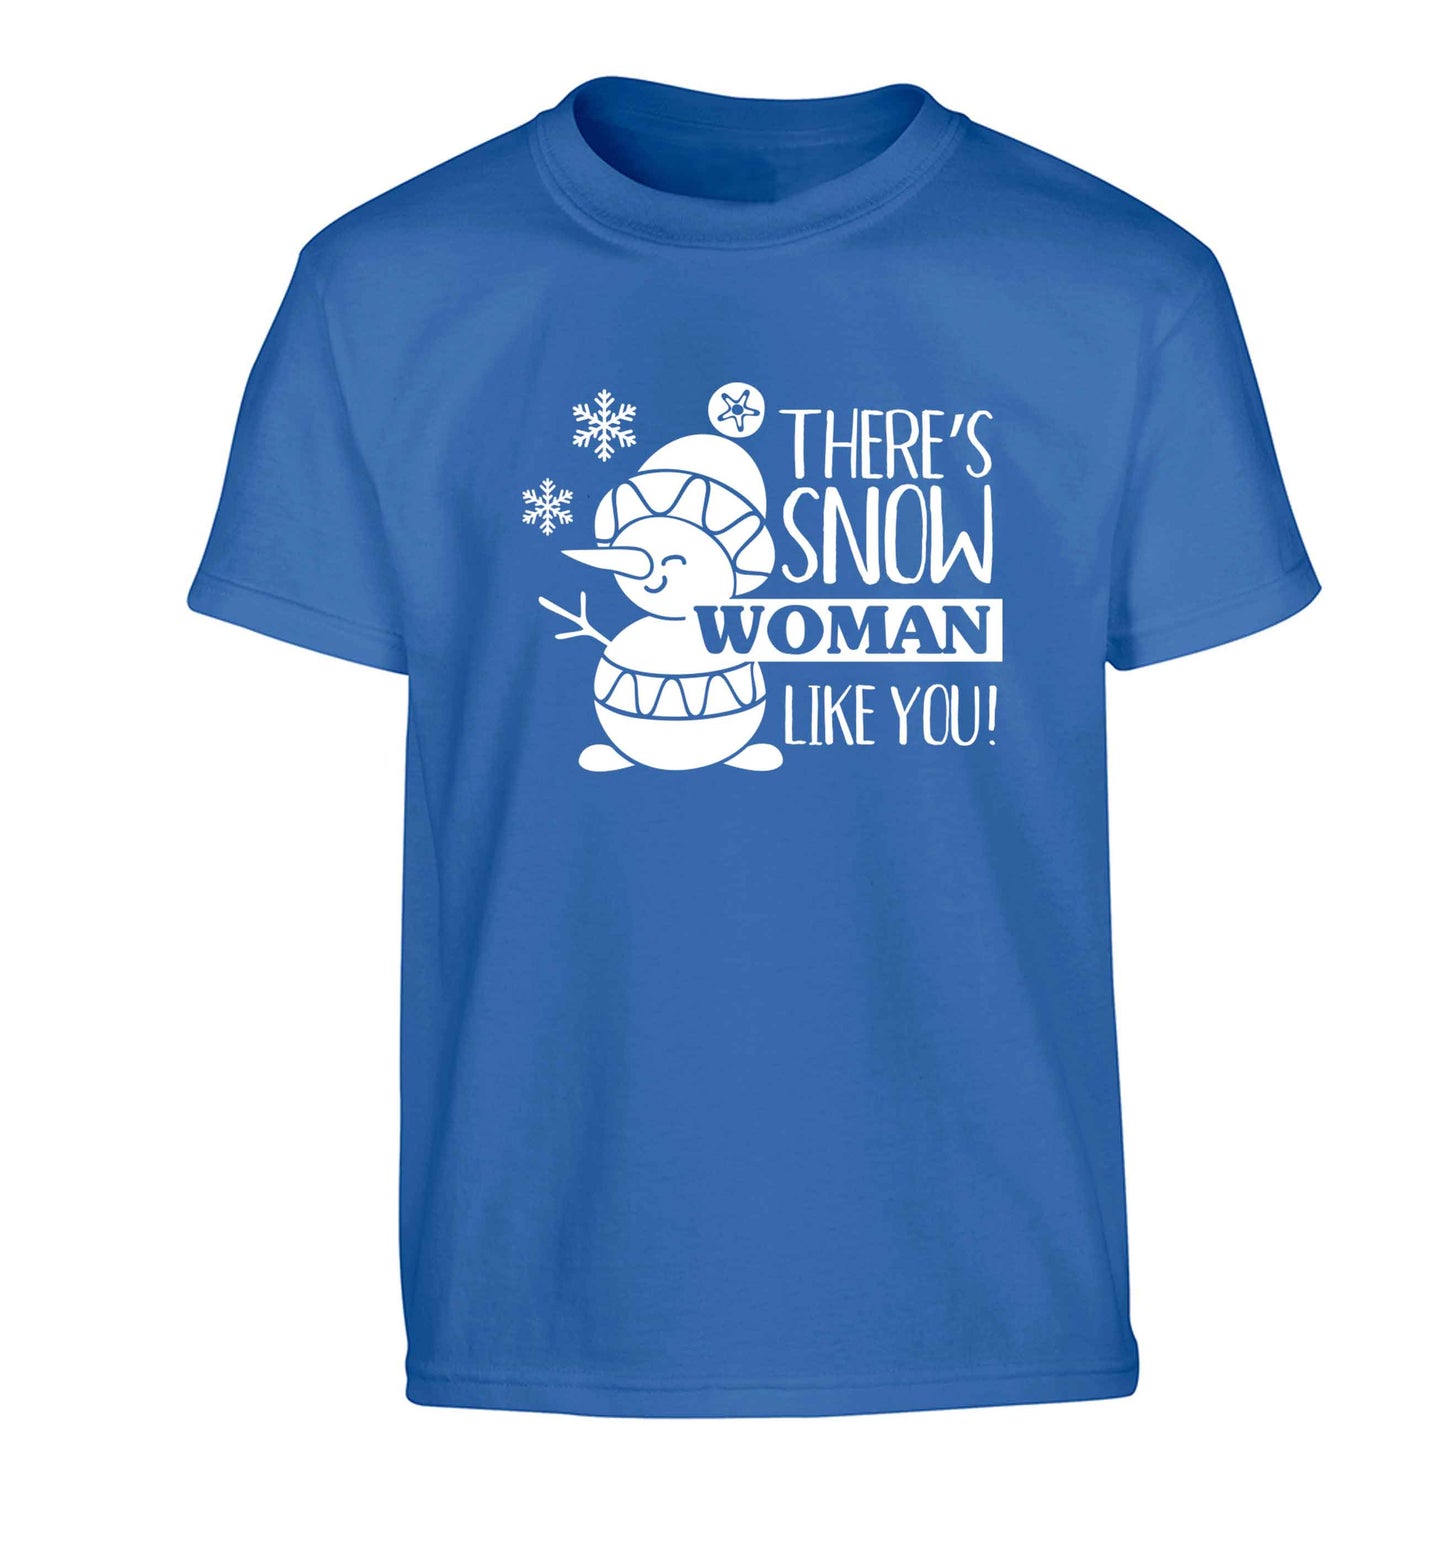 There's snow woman like you Children's blue Tshirt 12-13 Years